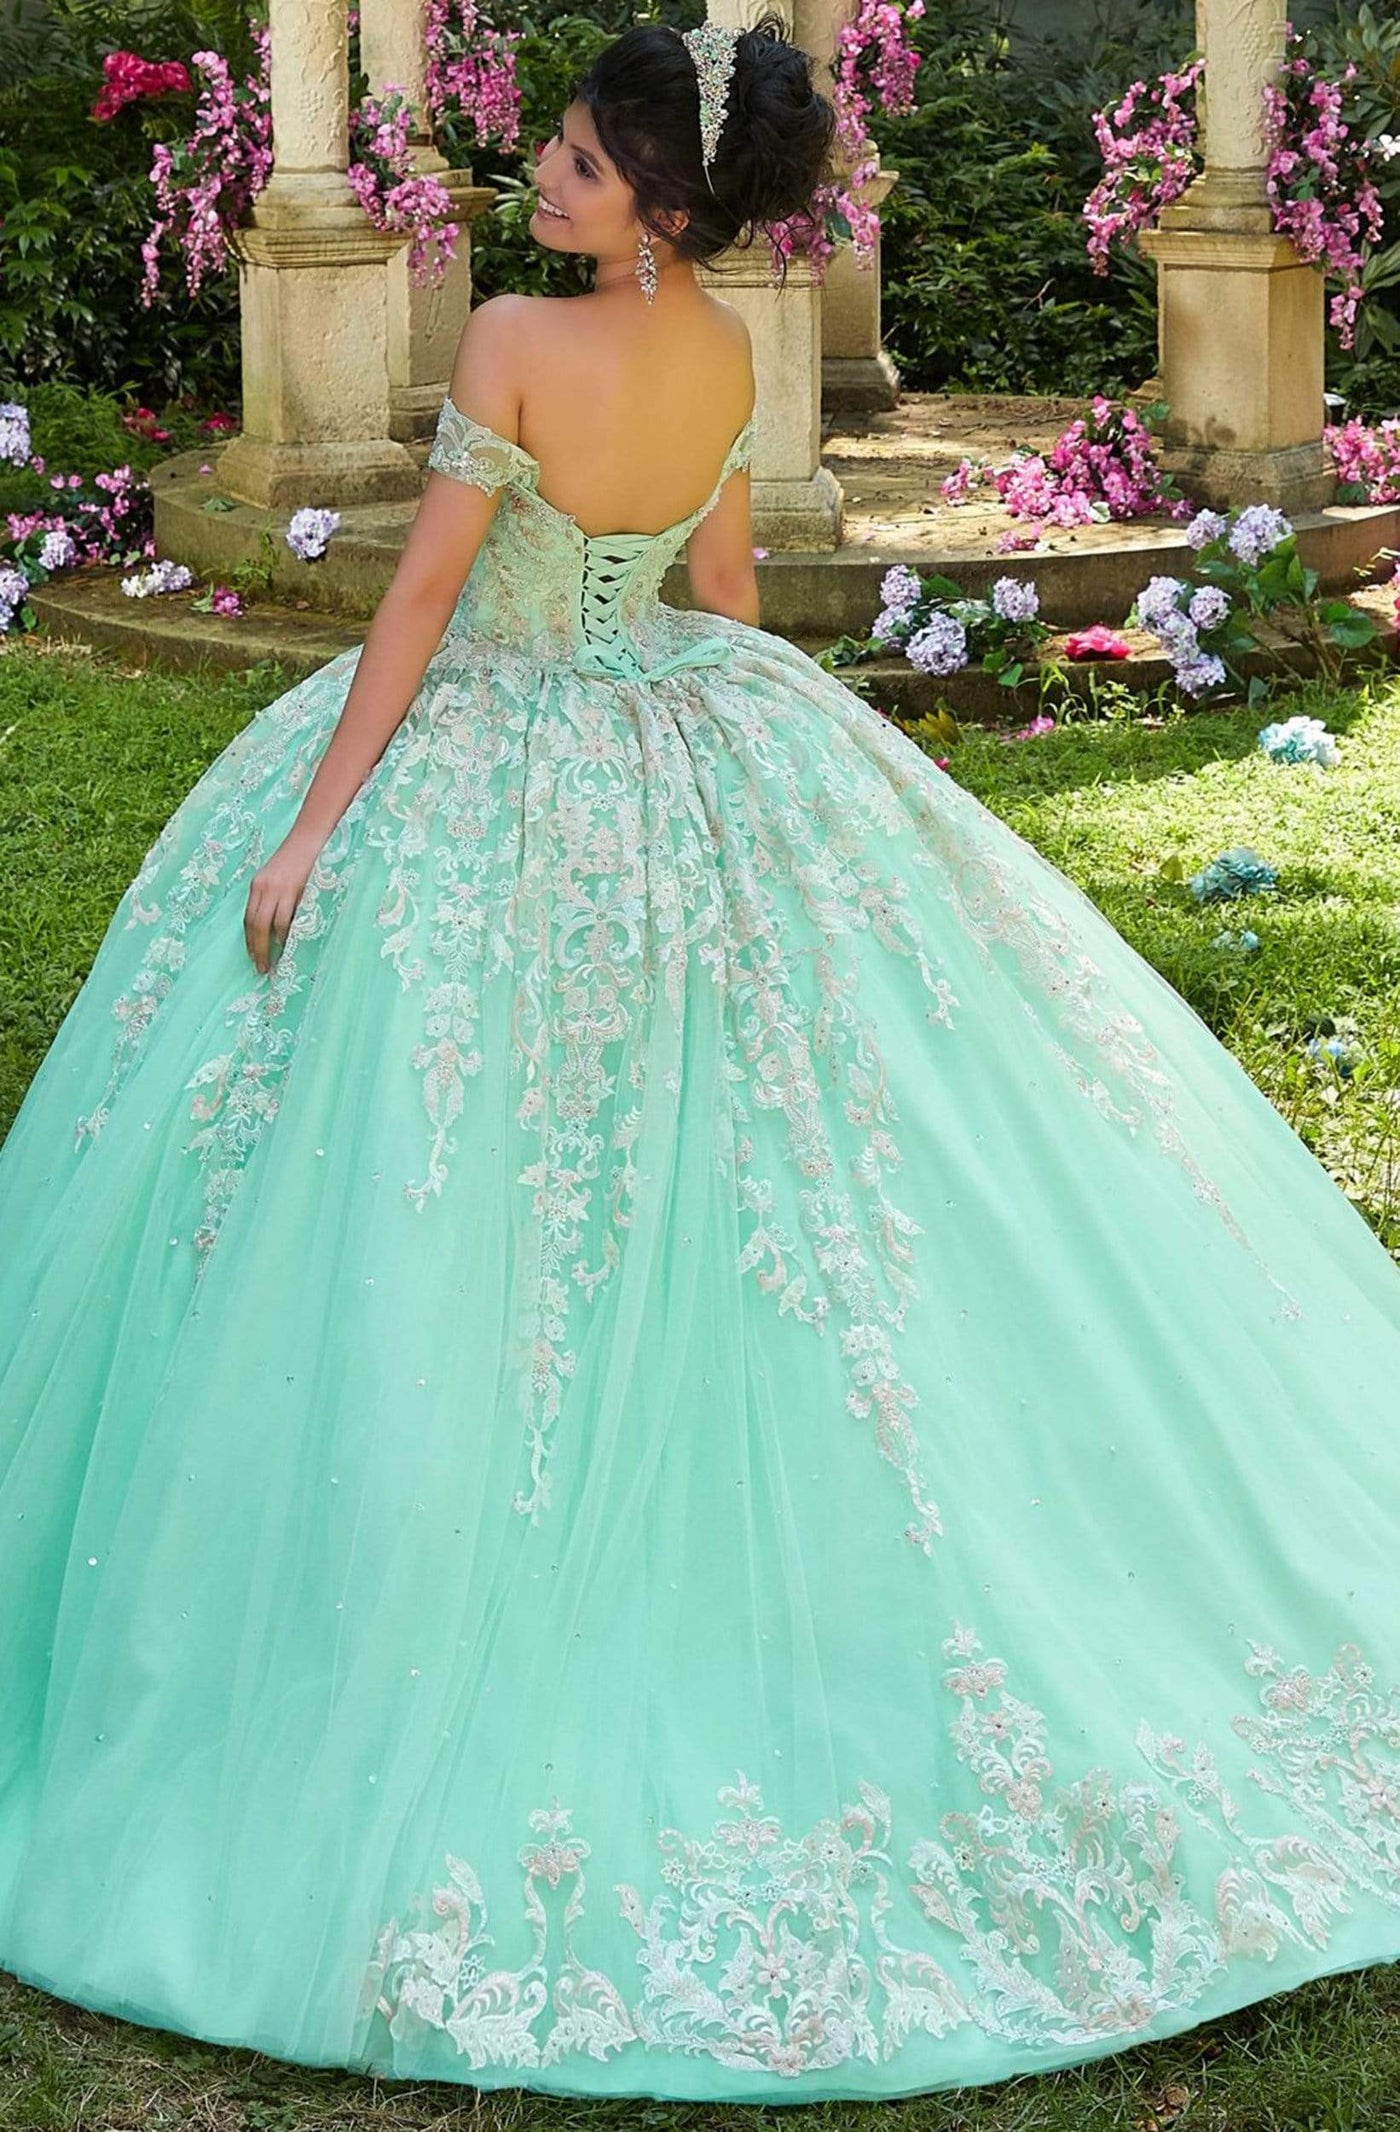 Vizcaya by Mori Lee - 89264 Embellished Sweetheart Ballgown Quinceanera Dresses